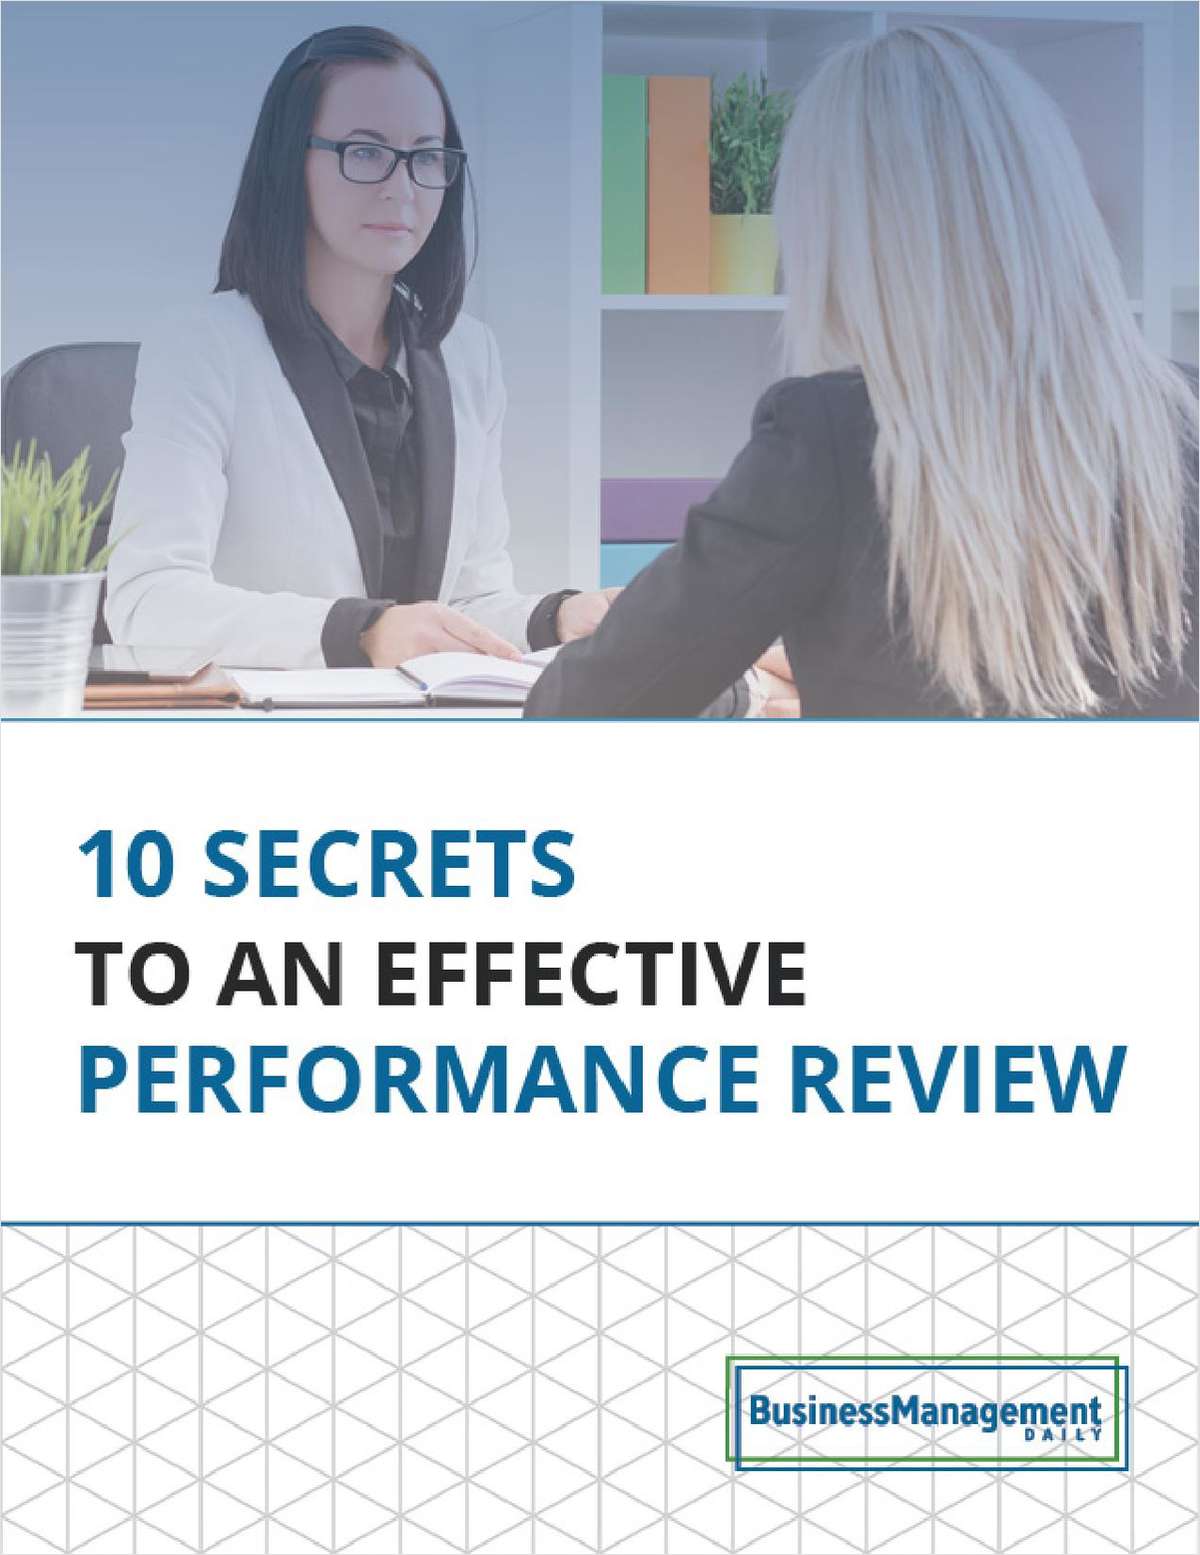 10 Secrets to an Effective Performance Review: Examples and Tips